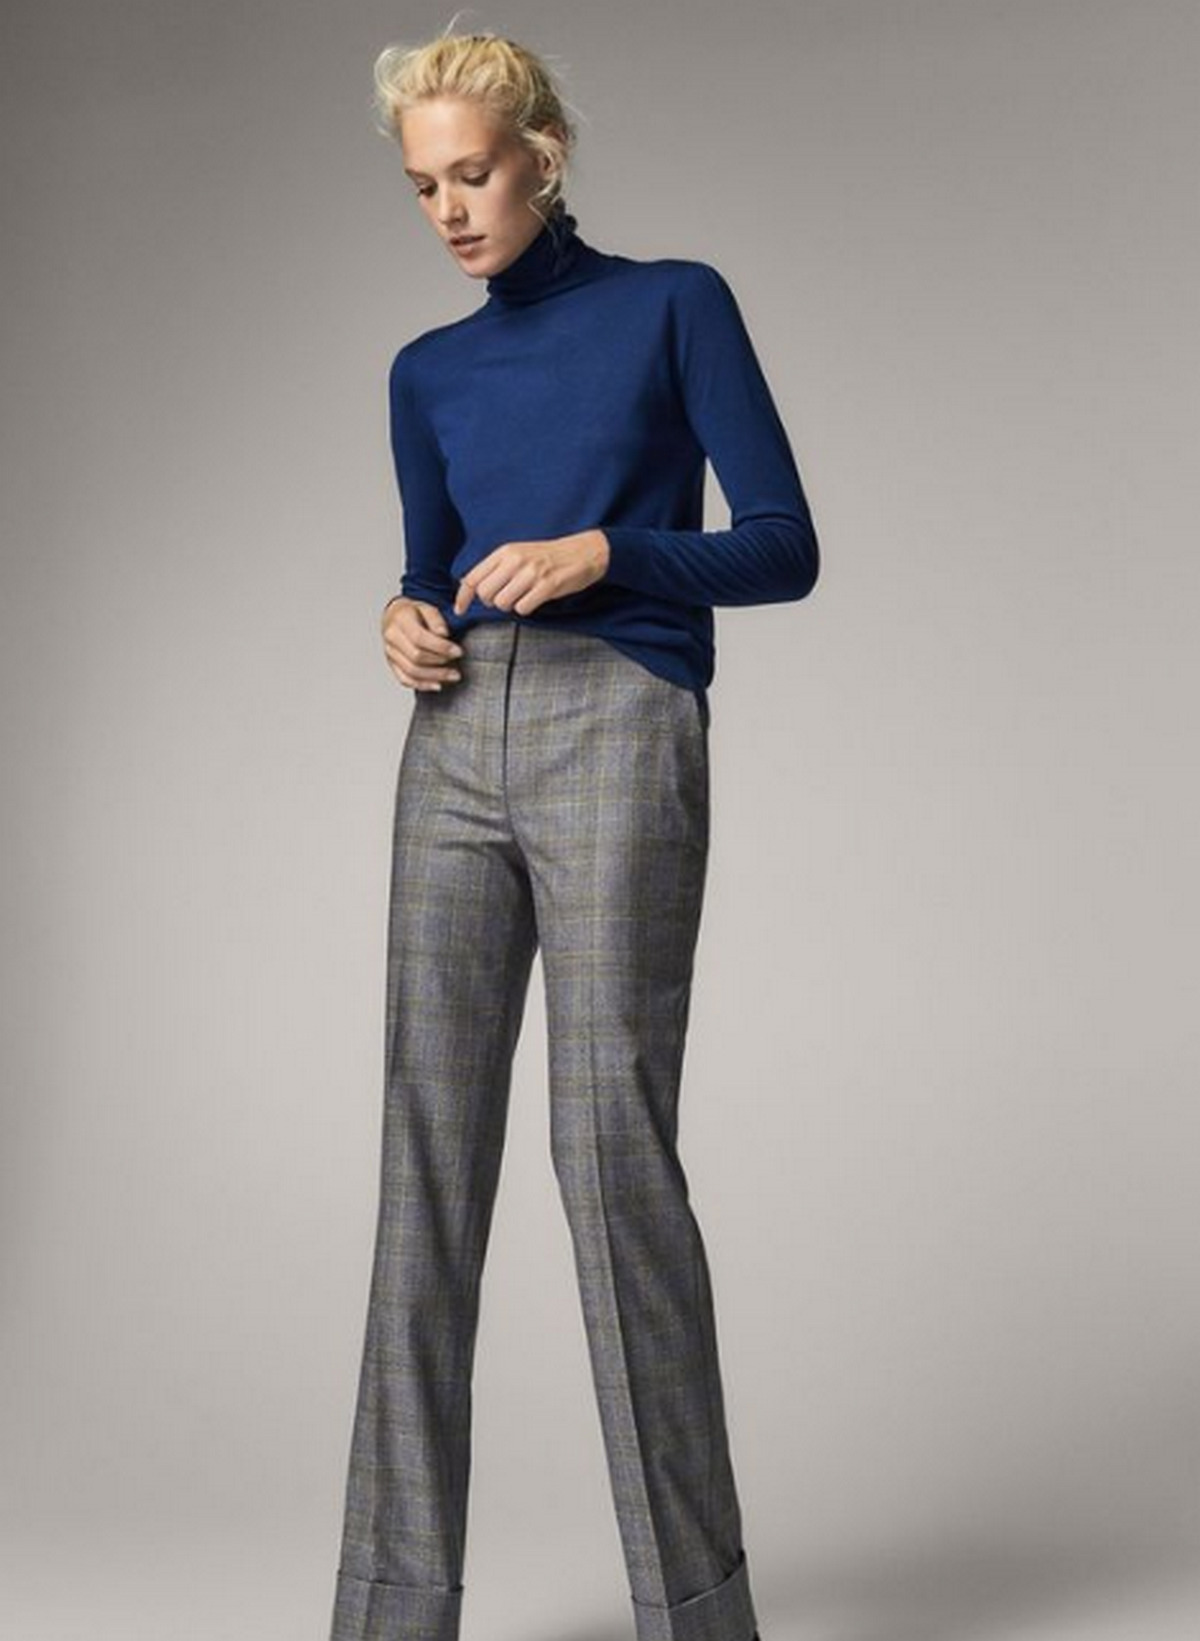 Blue Turtleneck Sweater And Gray Pants For Women